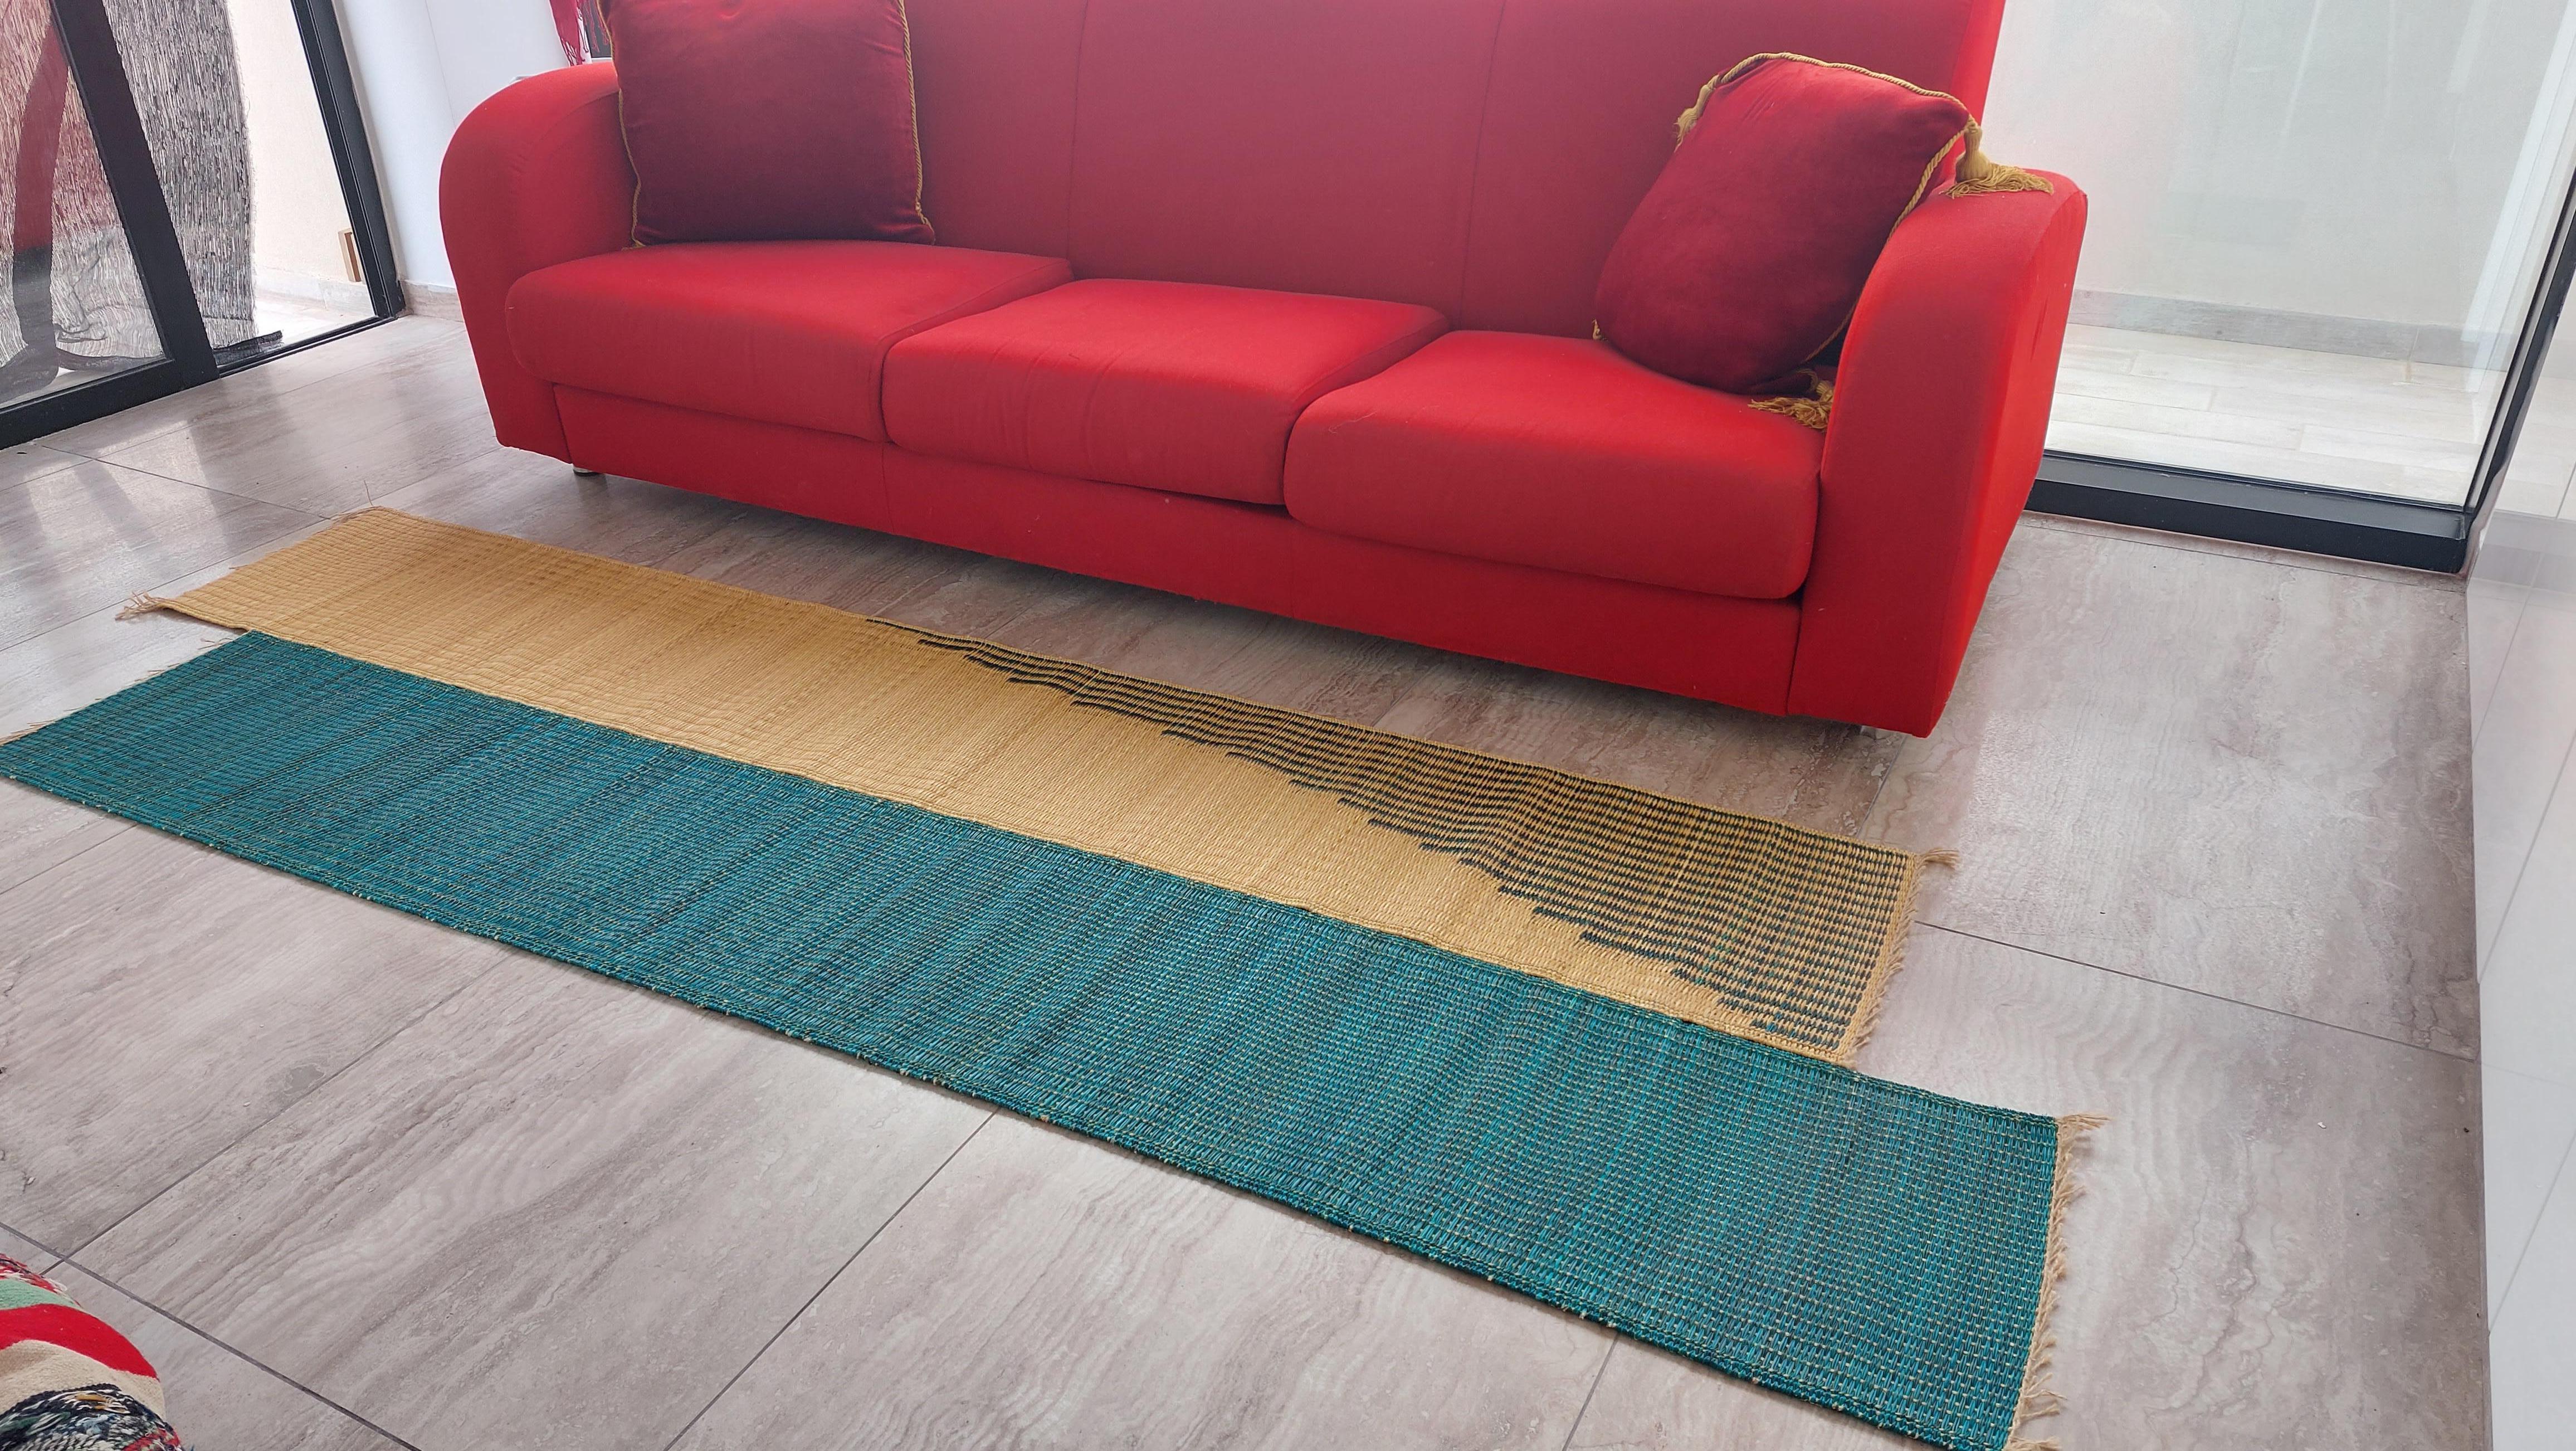 This runner rug, through its irregular shape, reflects a new way of assembling mats in 2 staggered bands, and reflects the contribution of design crafts in the art of weaving mats in Smar (sea rush).
This irregularly shaped natural fiber rug